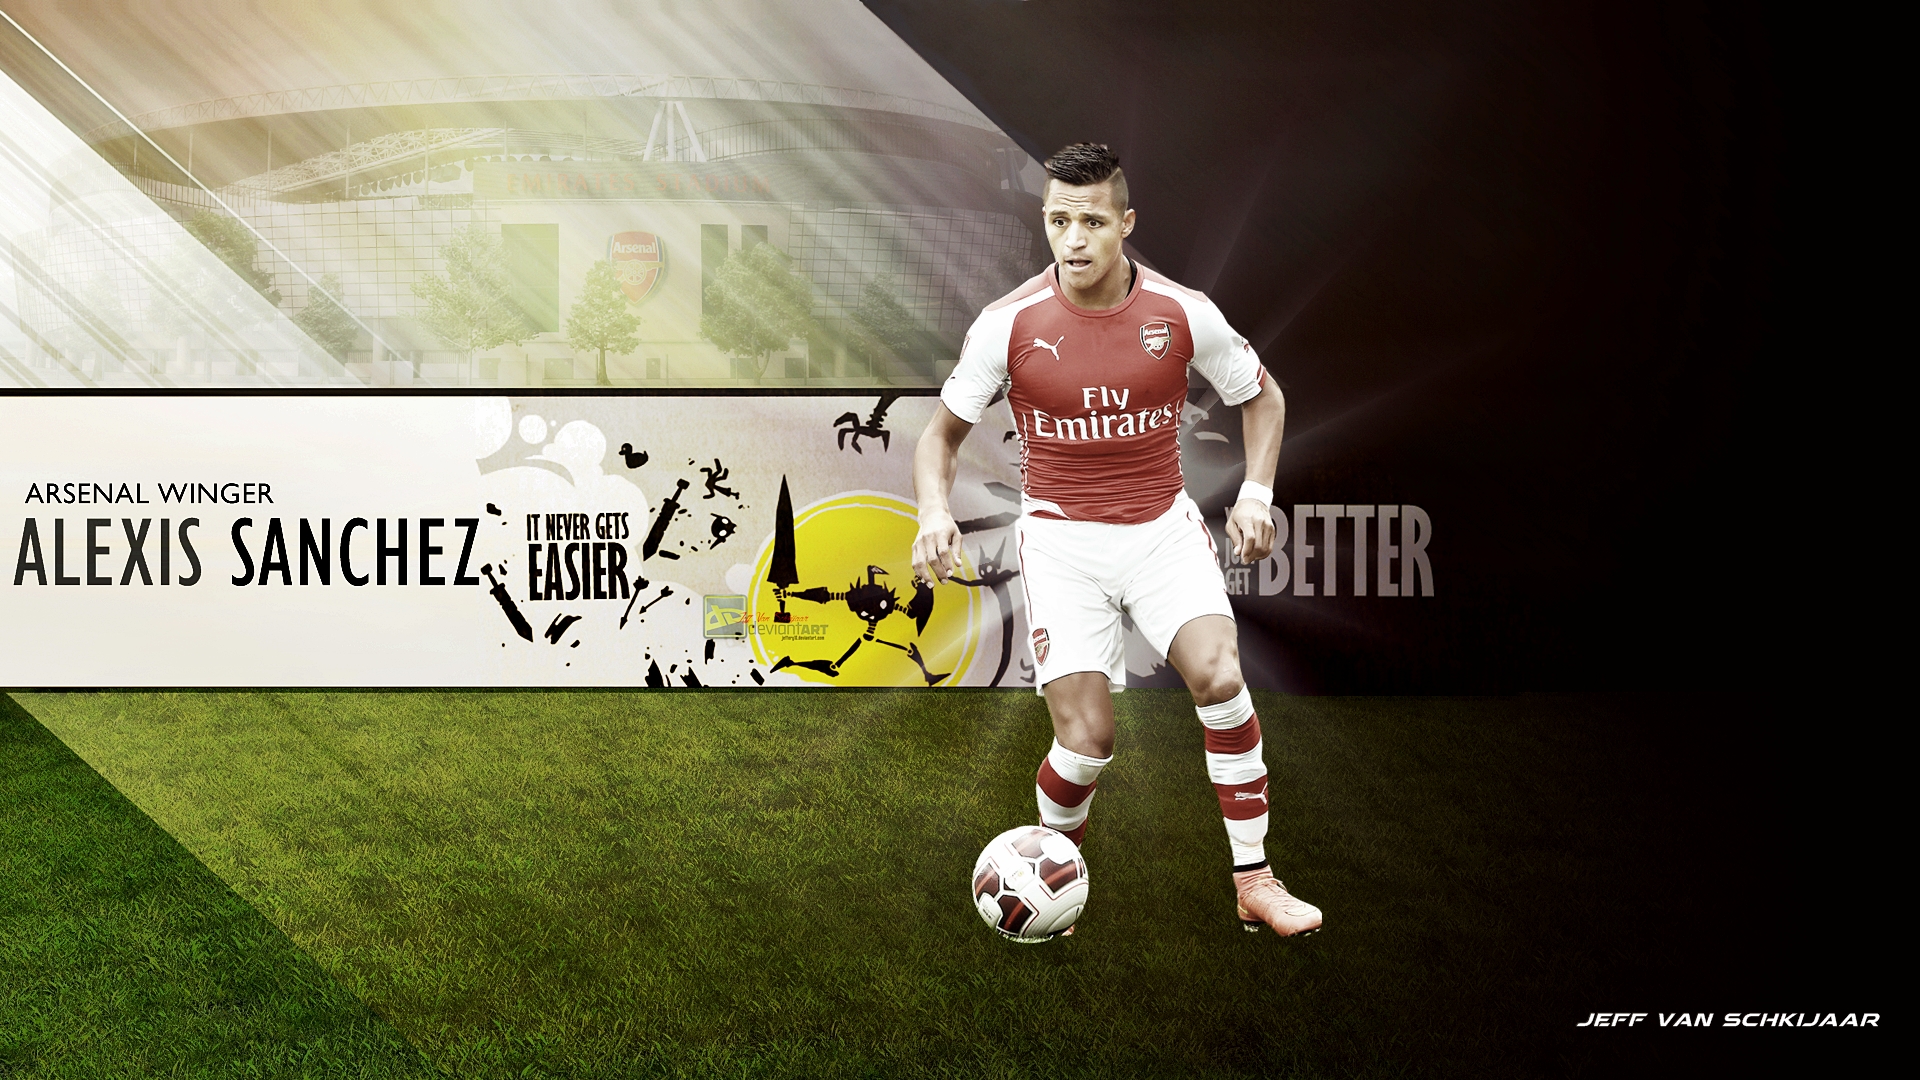 Alexis Sanchez Best Players Wallpapwer HD Wallpaper With